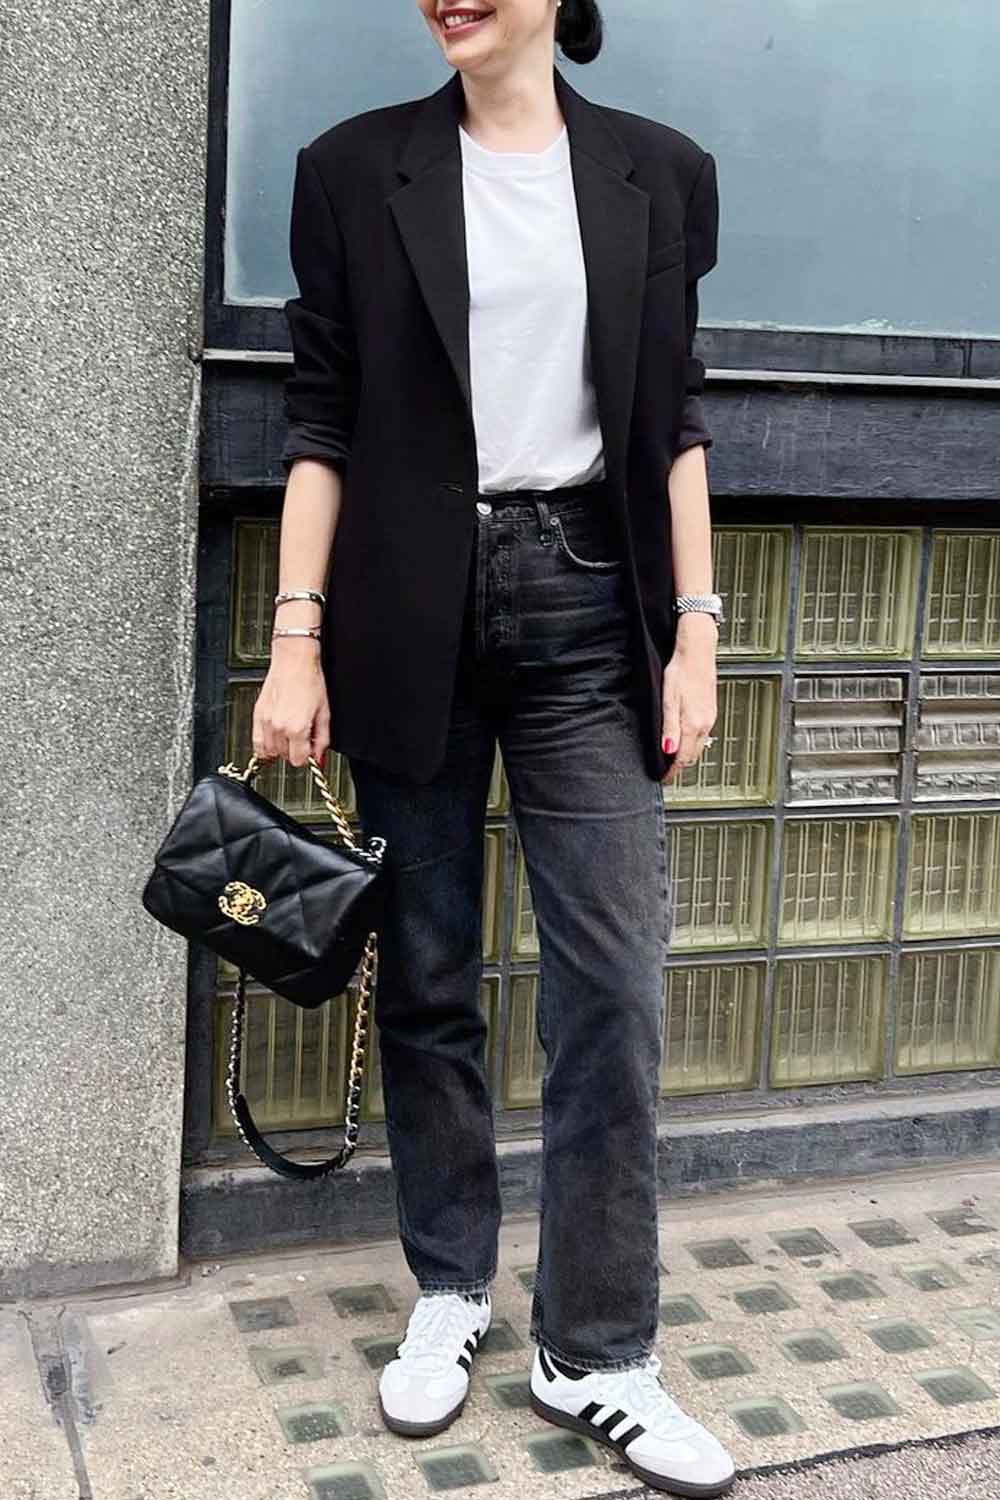 Classy Black and White Outfits for Office